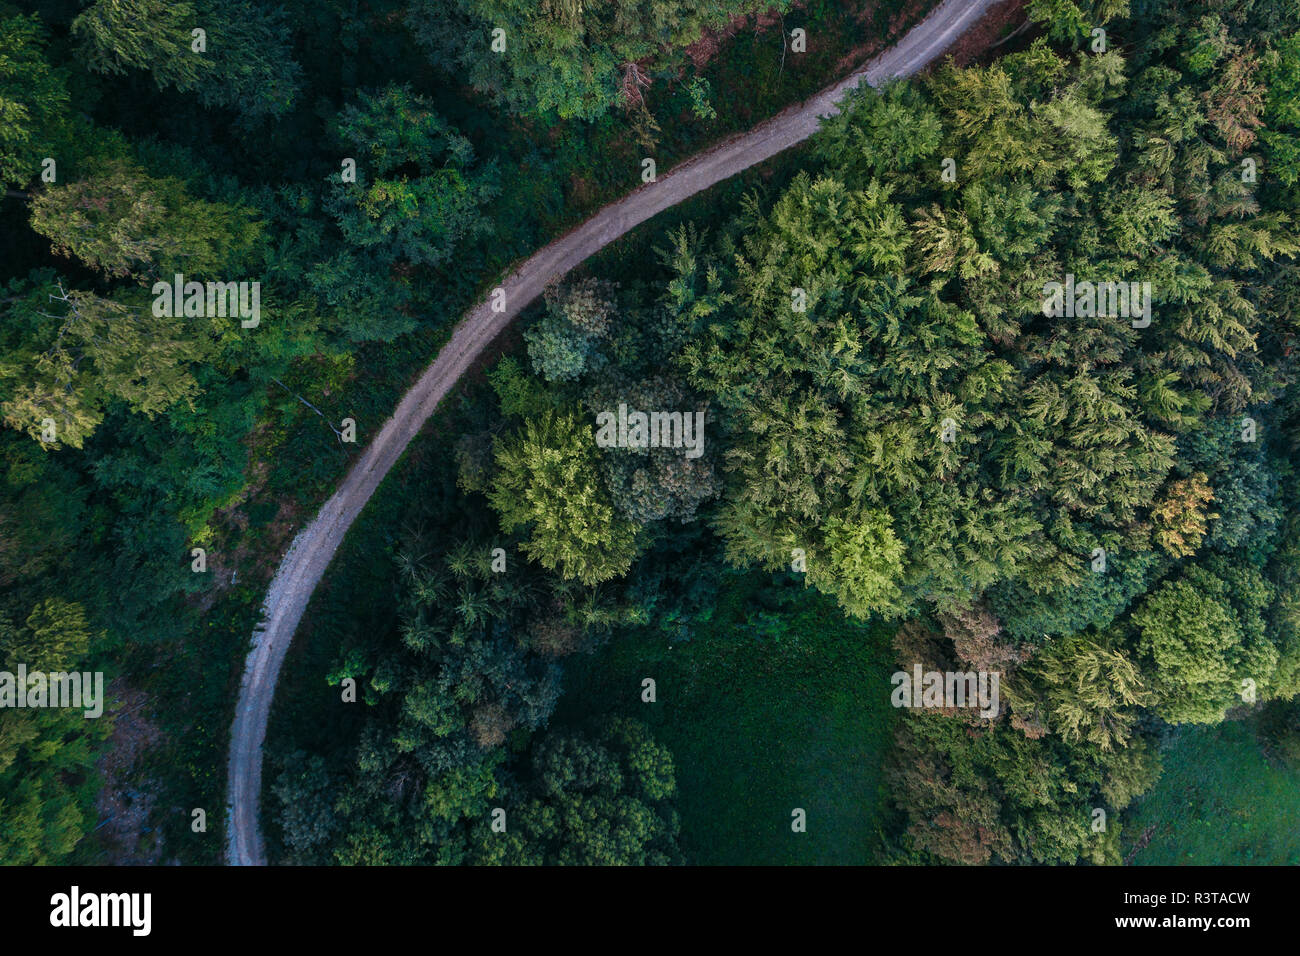 Austria, Lower Austria, Vienna Woods, Biosphere Reserve Vienna Woods, Aerial view of dirt road and forest in the early morning Stock Photo